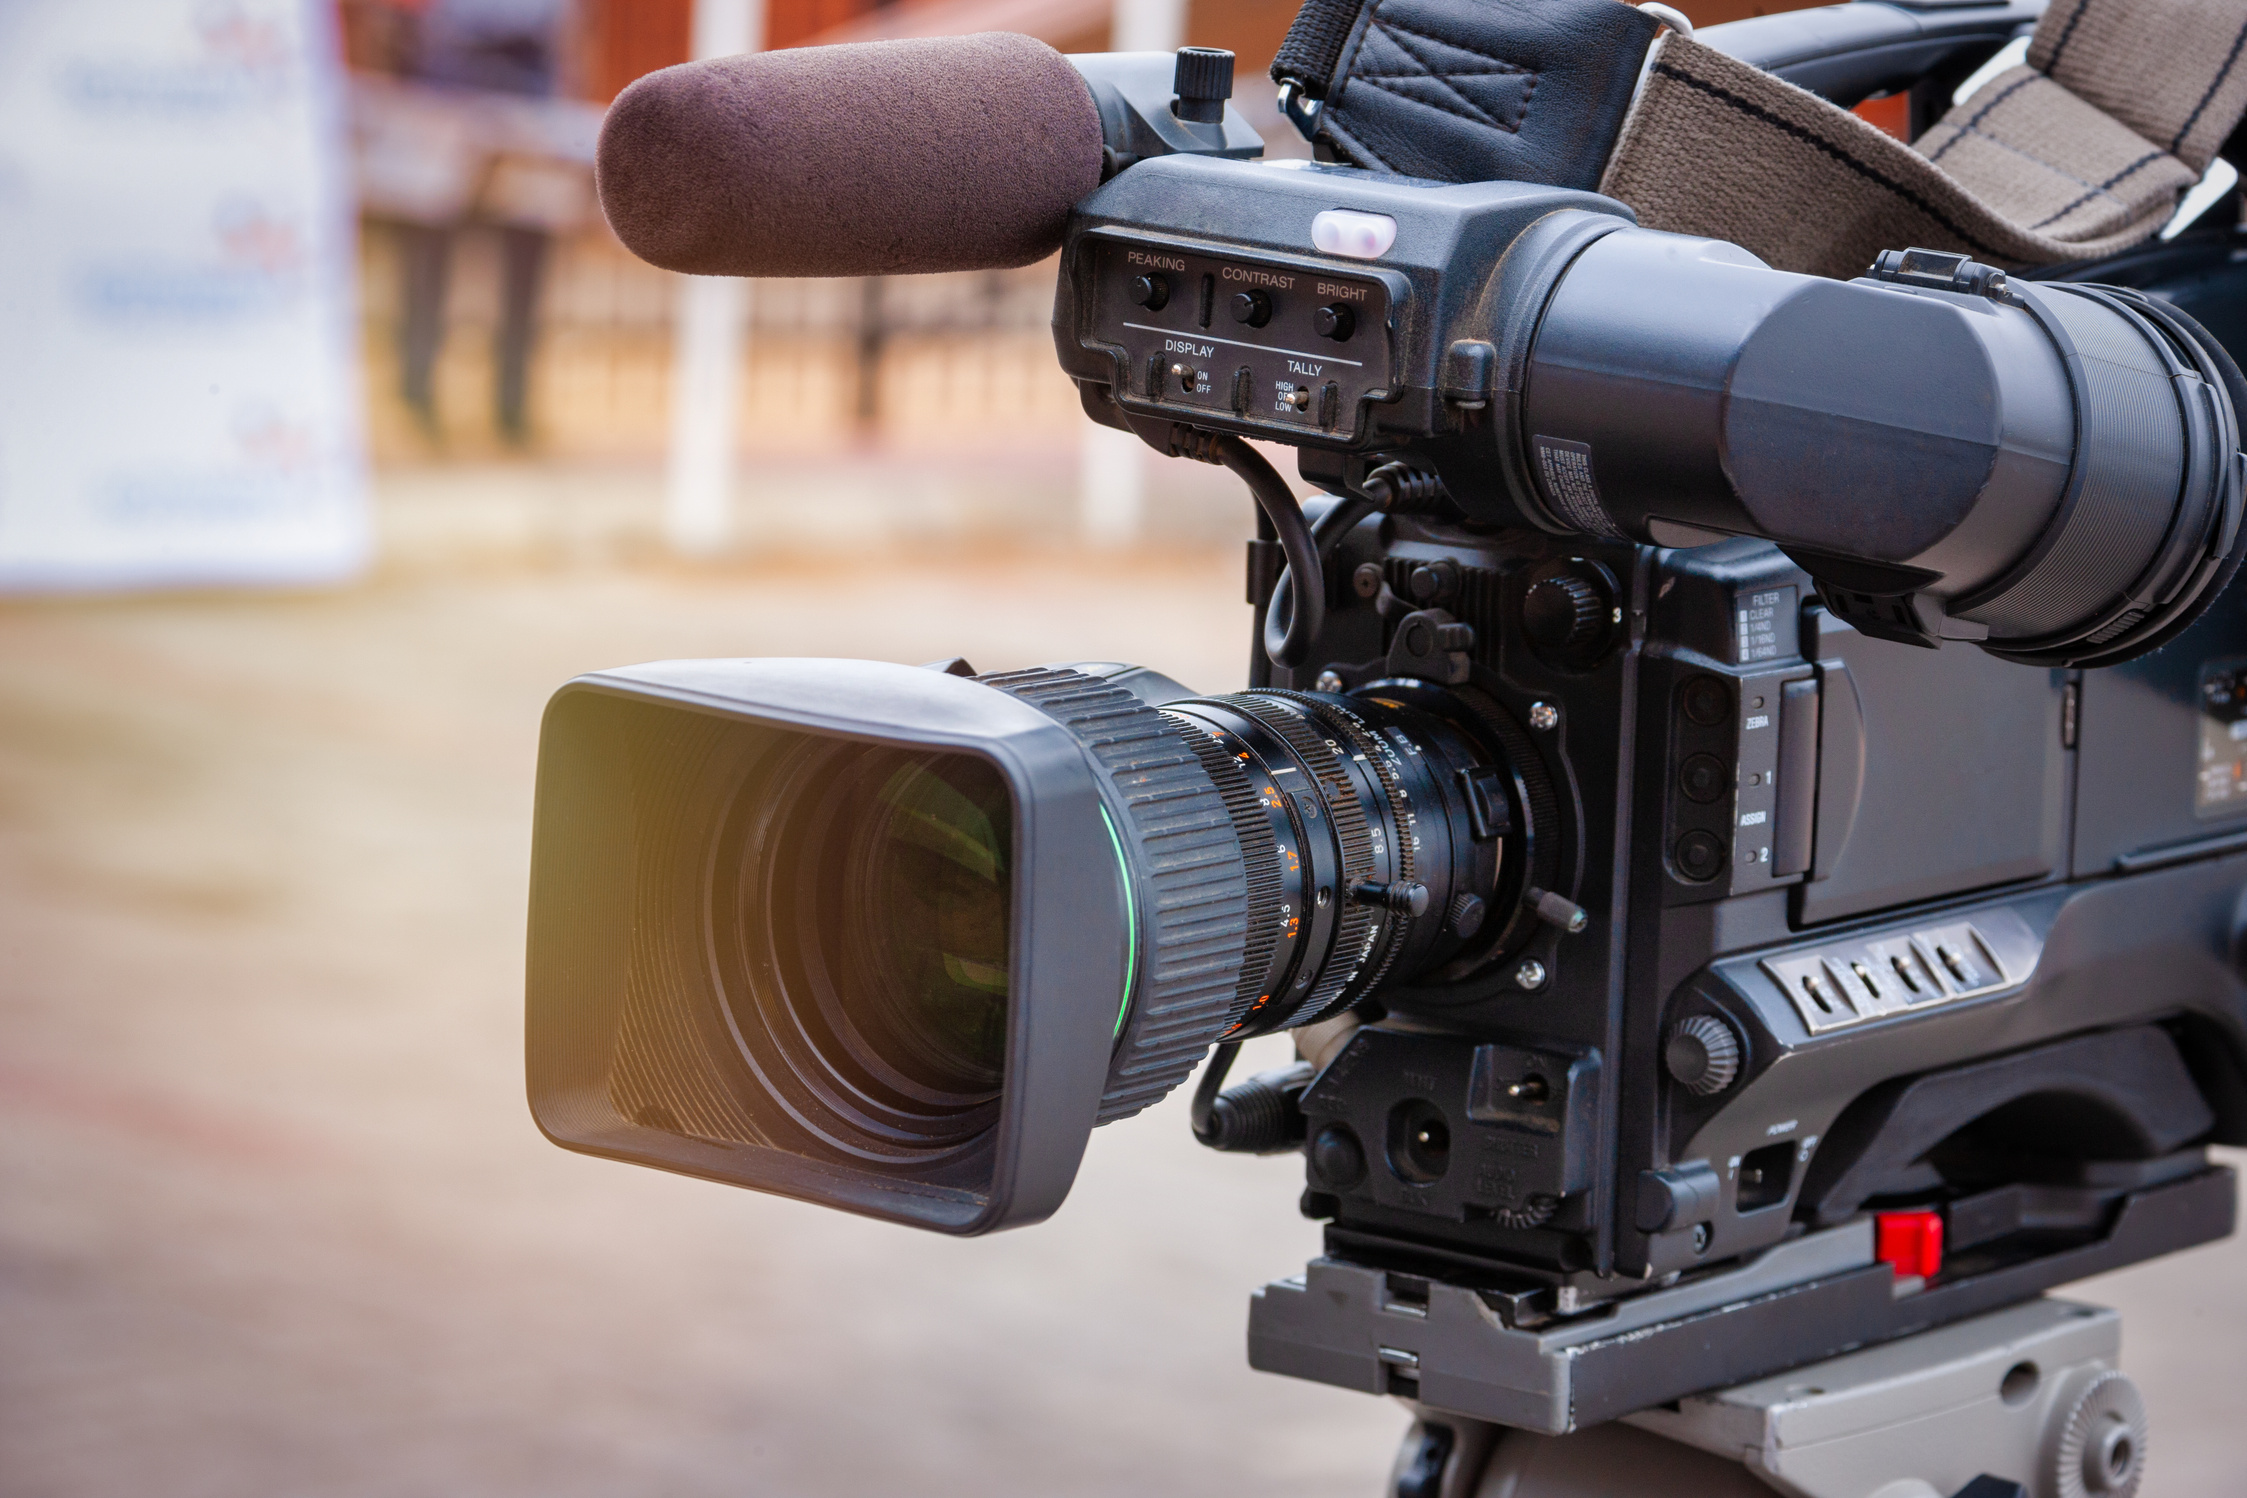 broadcast camcorder used by TV stations